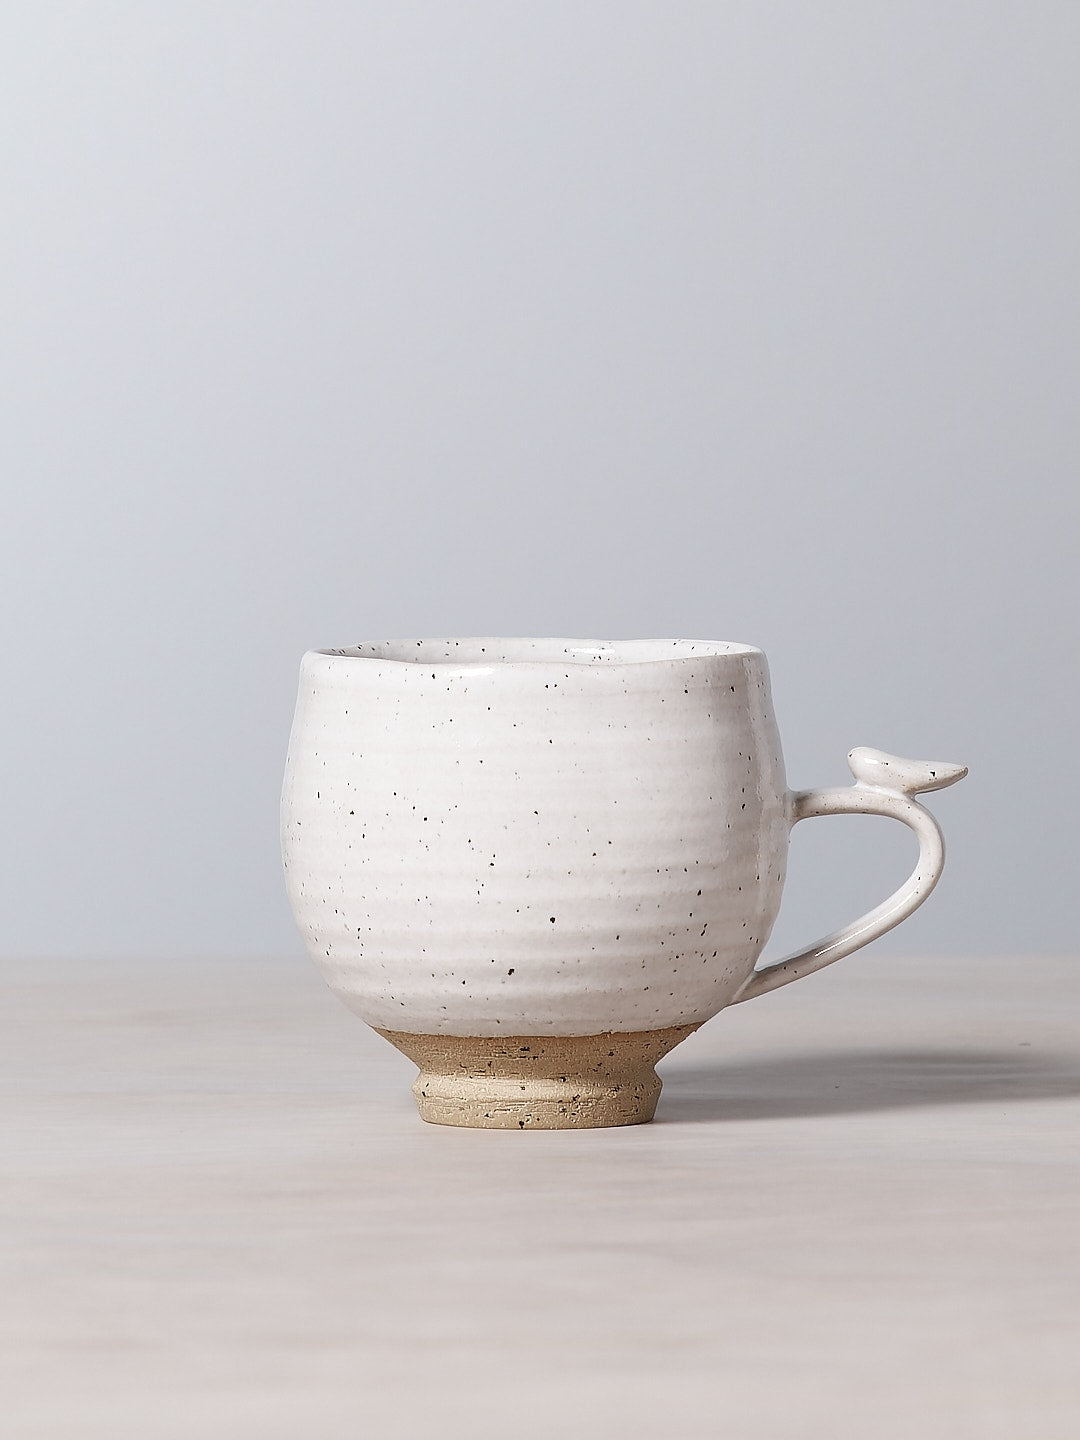 A Bird Handle Cup – White with a bird shape handle sitting on a table from Jino Ceramic Studio.